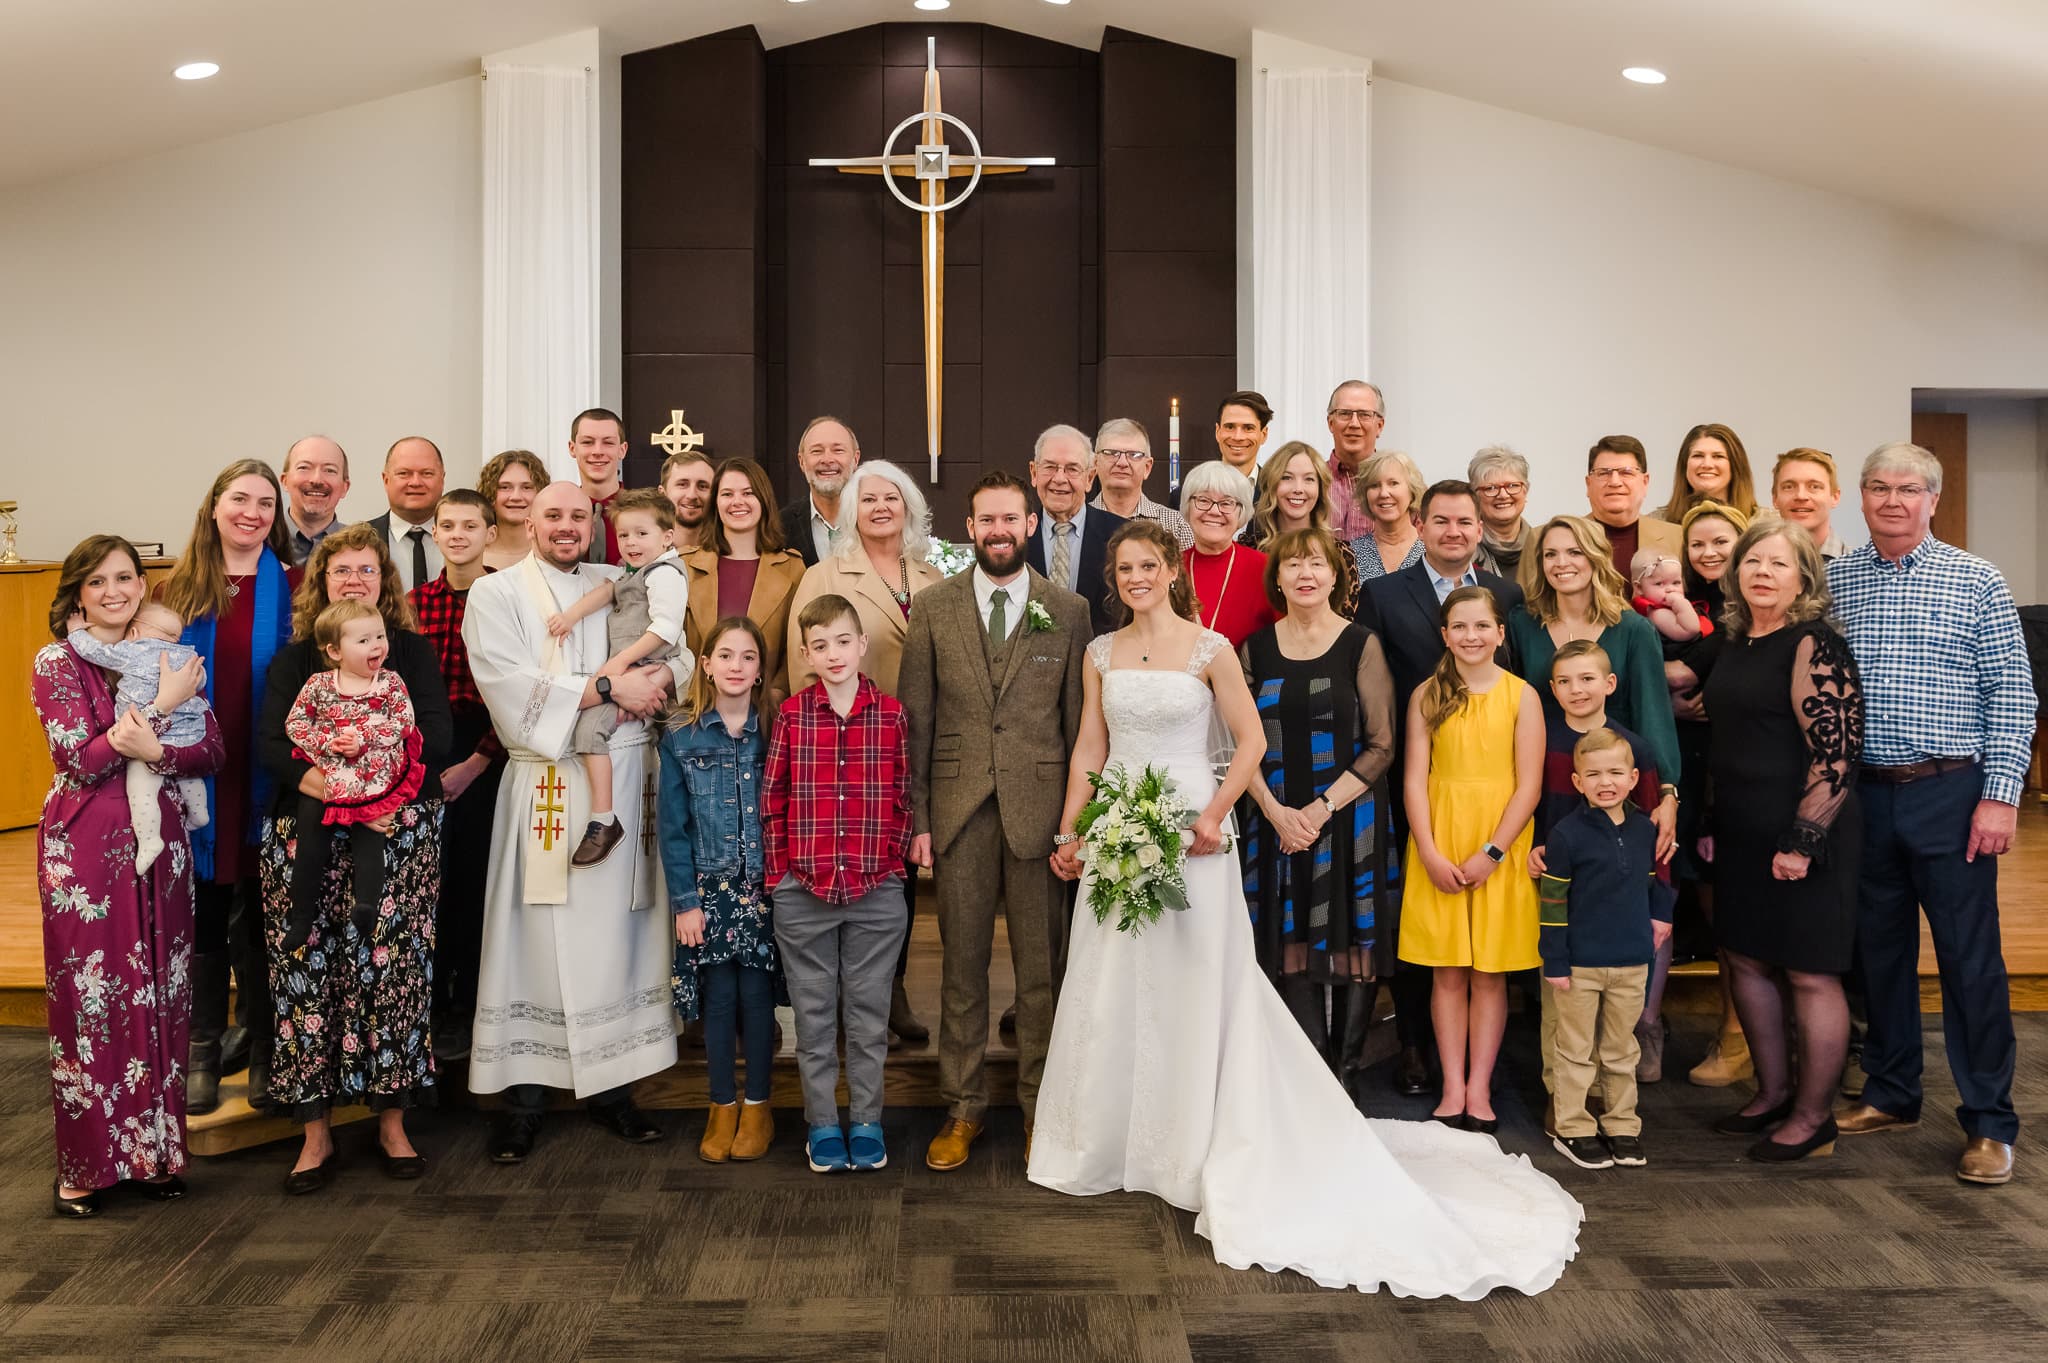 The bride and groom at the front of the church surrounded by both sides of their families for a large group photo.